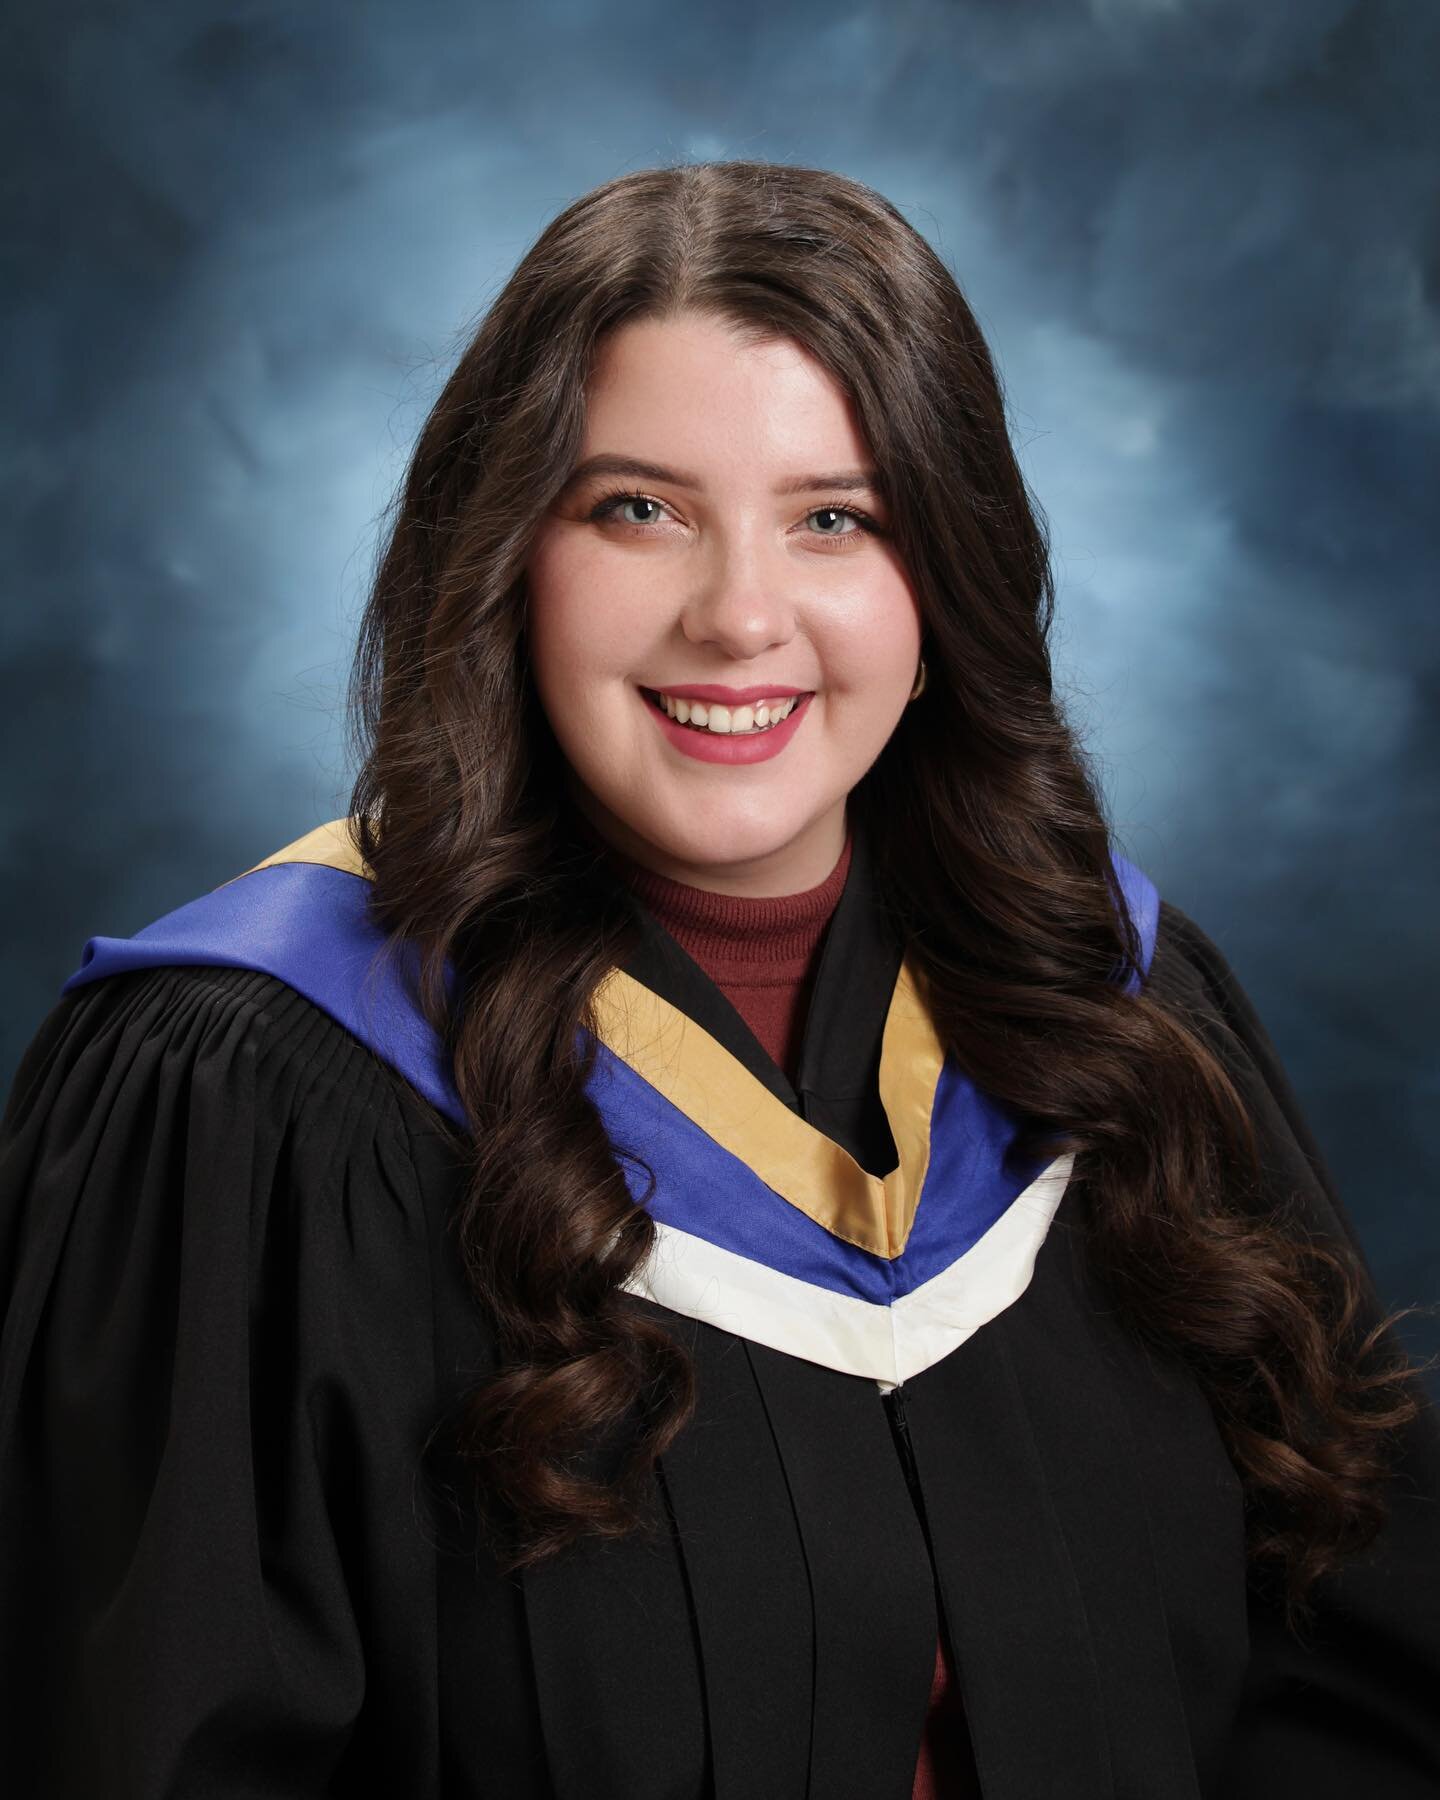 It&rsquo;s finally happening! 🎓

I still remember sitting on the couch outside of the library after my first semester on the verge of tears because I felt like I was in over my head. Everyone around me seemed to have their life figured out and I tho